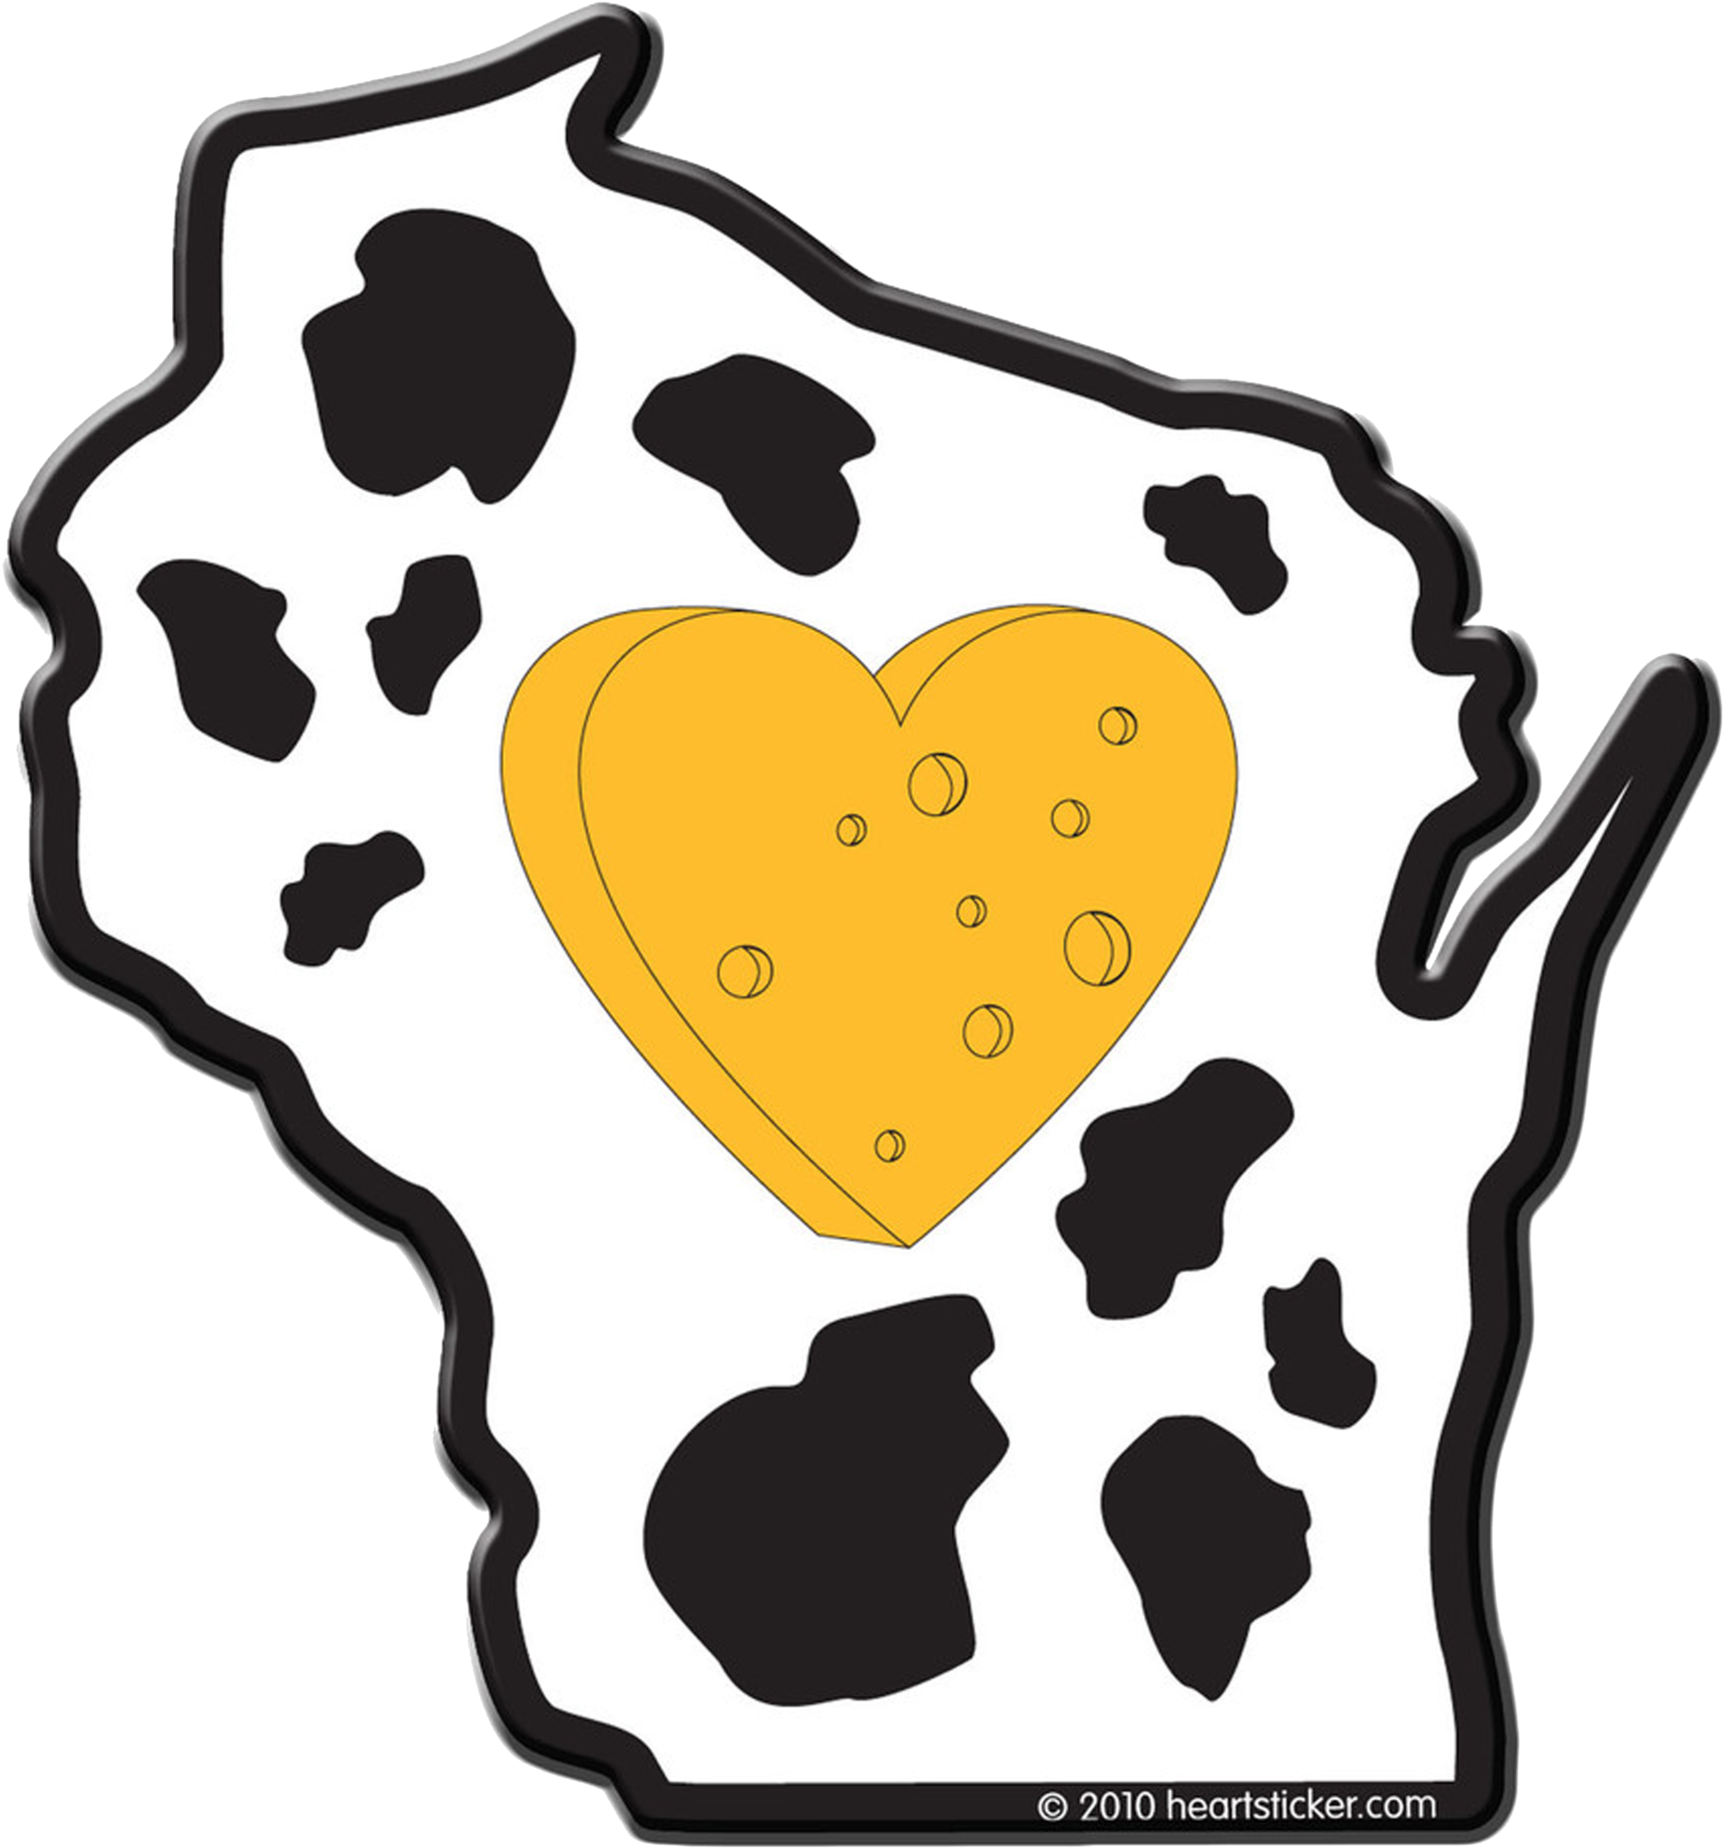 Find The Trendy Wisconsin Heart And Bumper Stickers - Wisconsin With Heart (2048x2048)